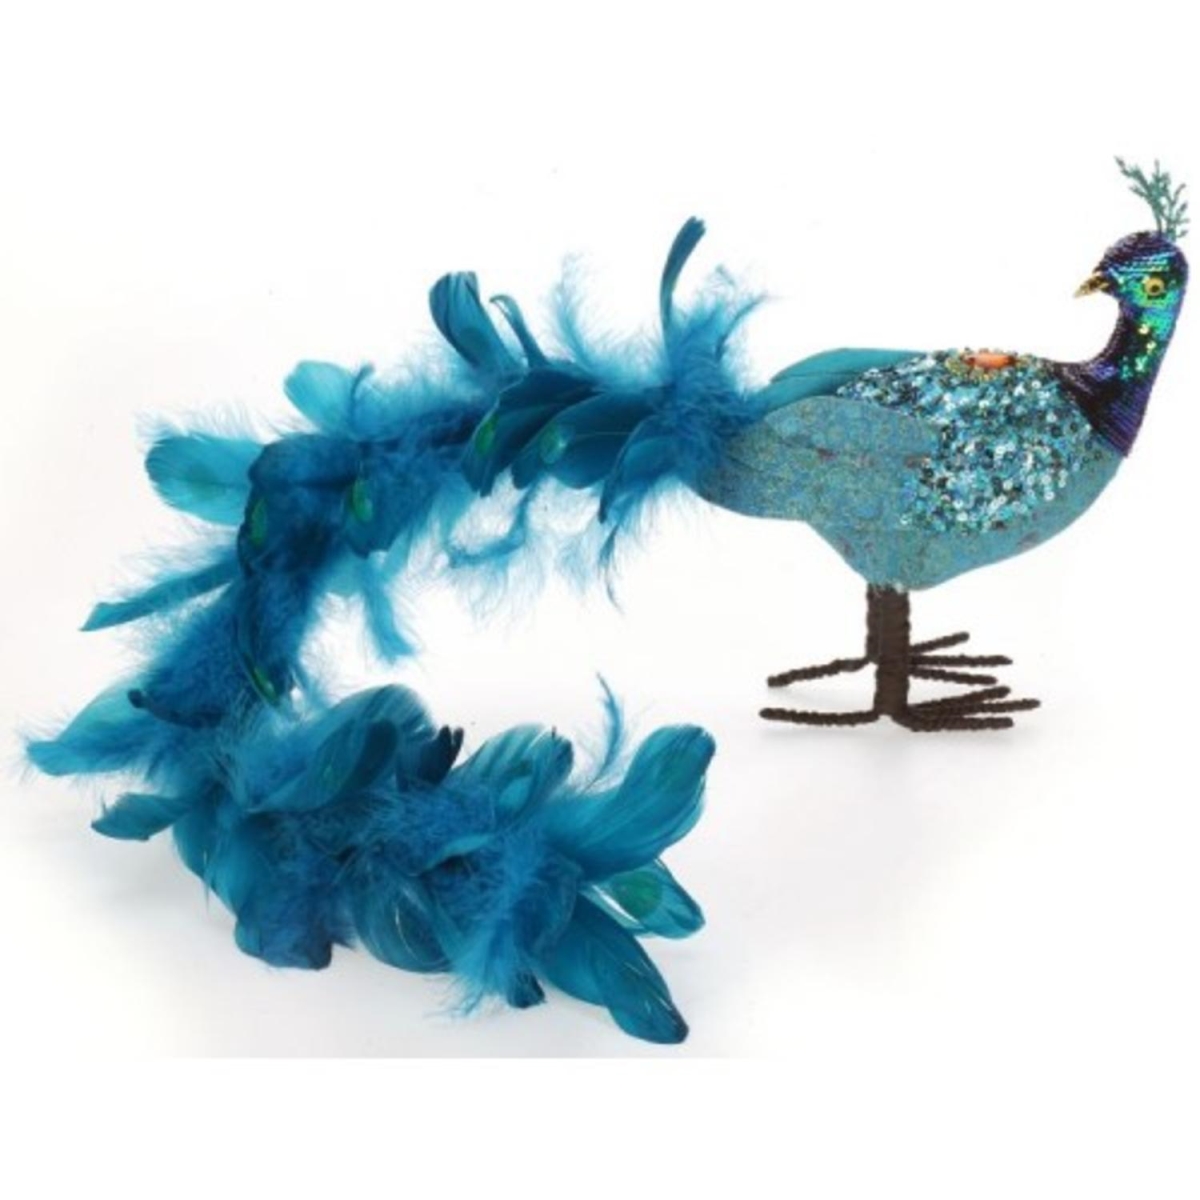 31460001 24 In. Regal Peacock Flowing Bondi Blue Closed-tail Bird Christmas Table Top Decoration